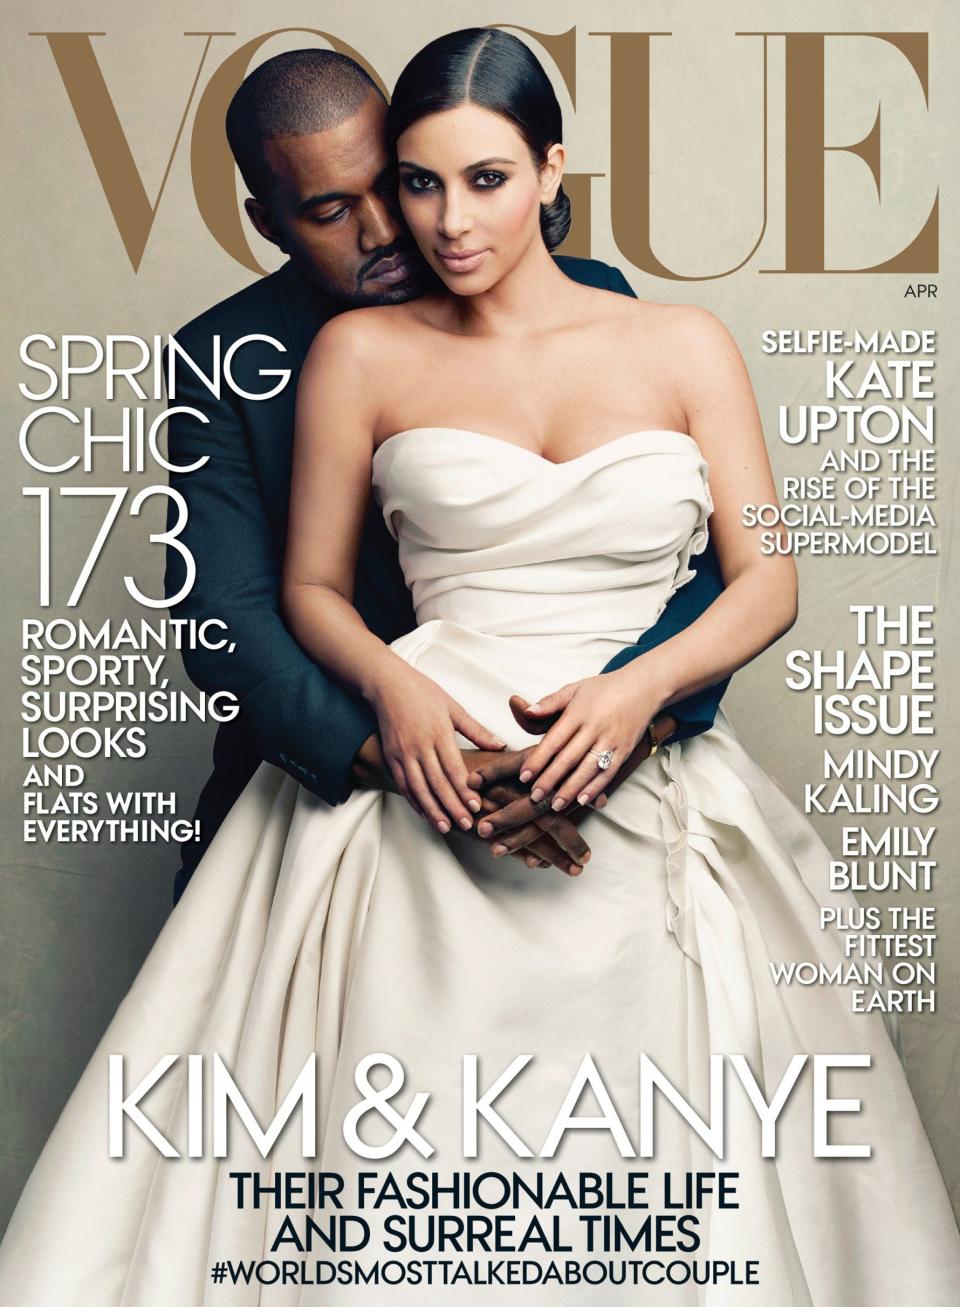 The pair's nuptials became the cover image of society bible Vogue - AP/Annie Leibovitz